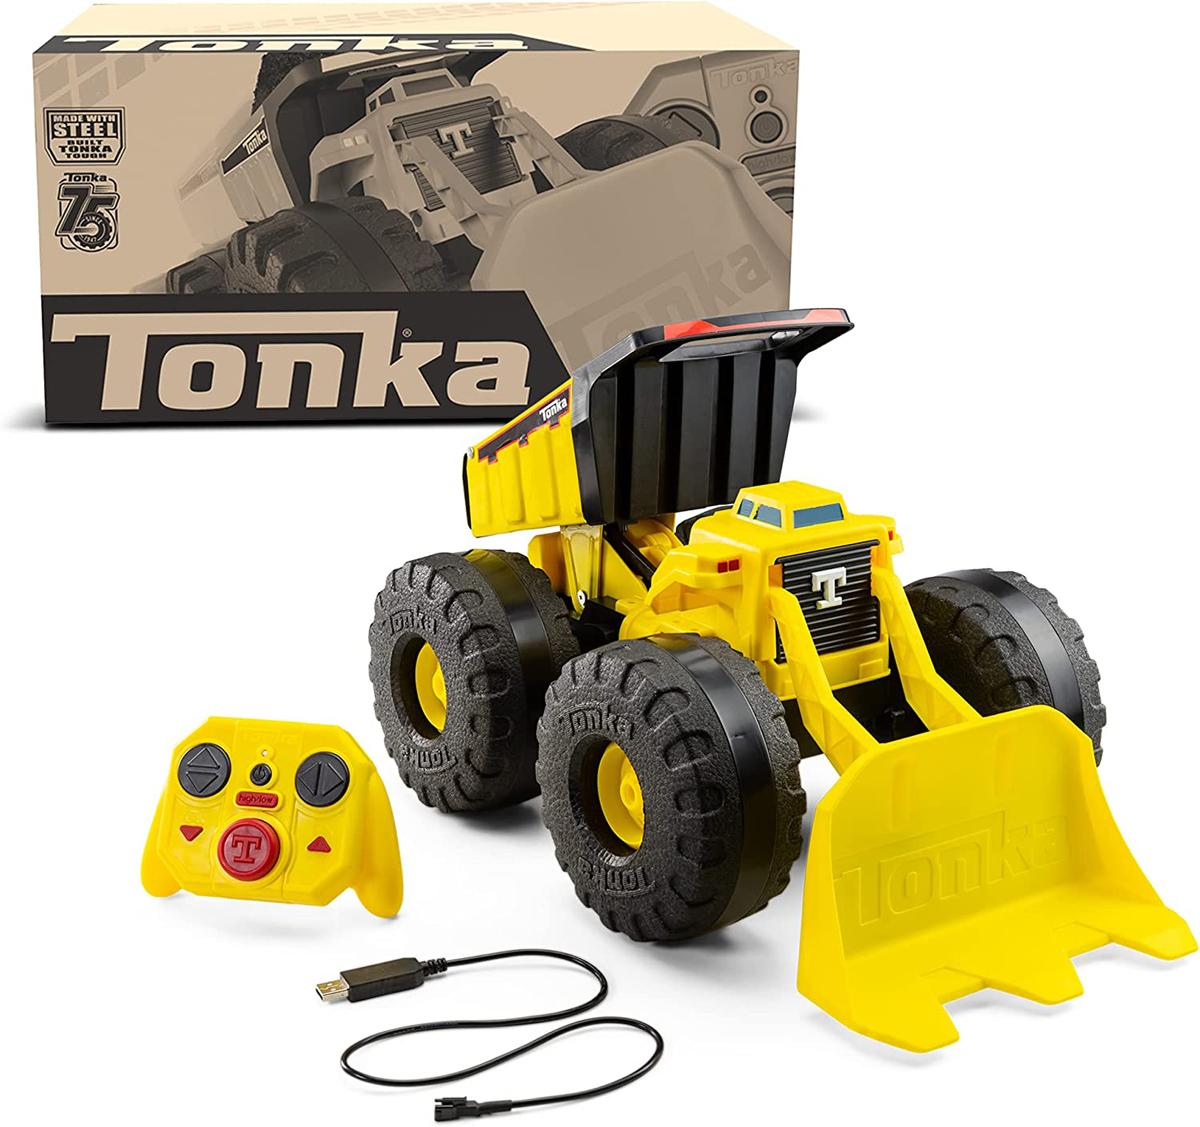 Tonka RC Mighty Monster Motorized Dump and Plow Toy Truck for $20.24